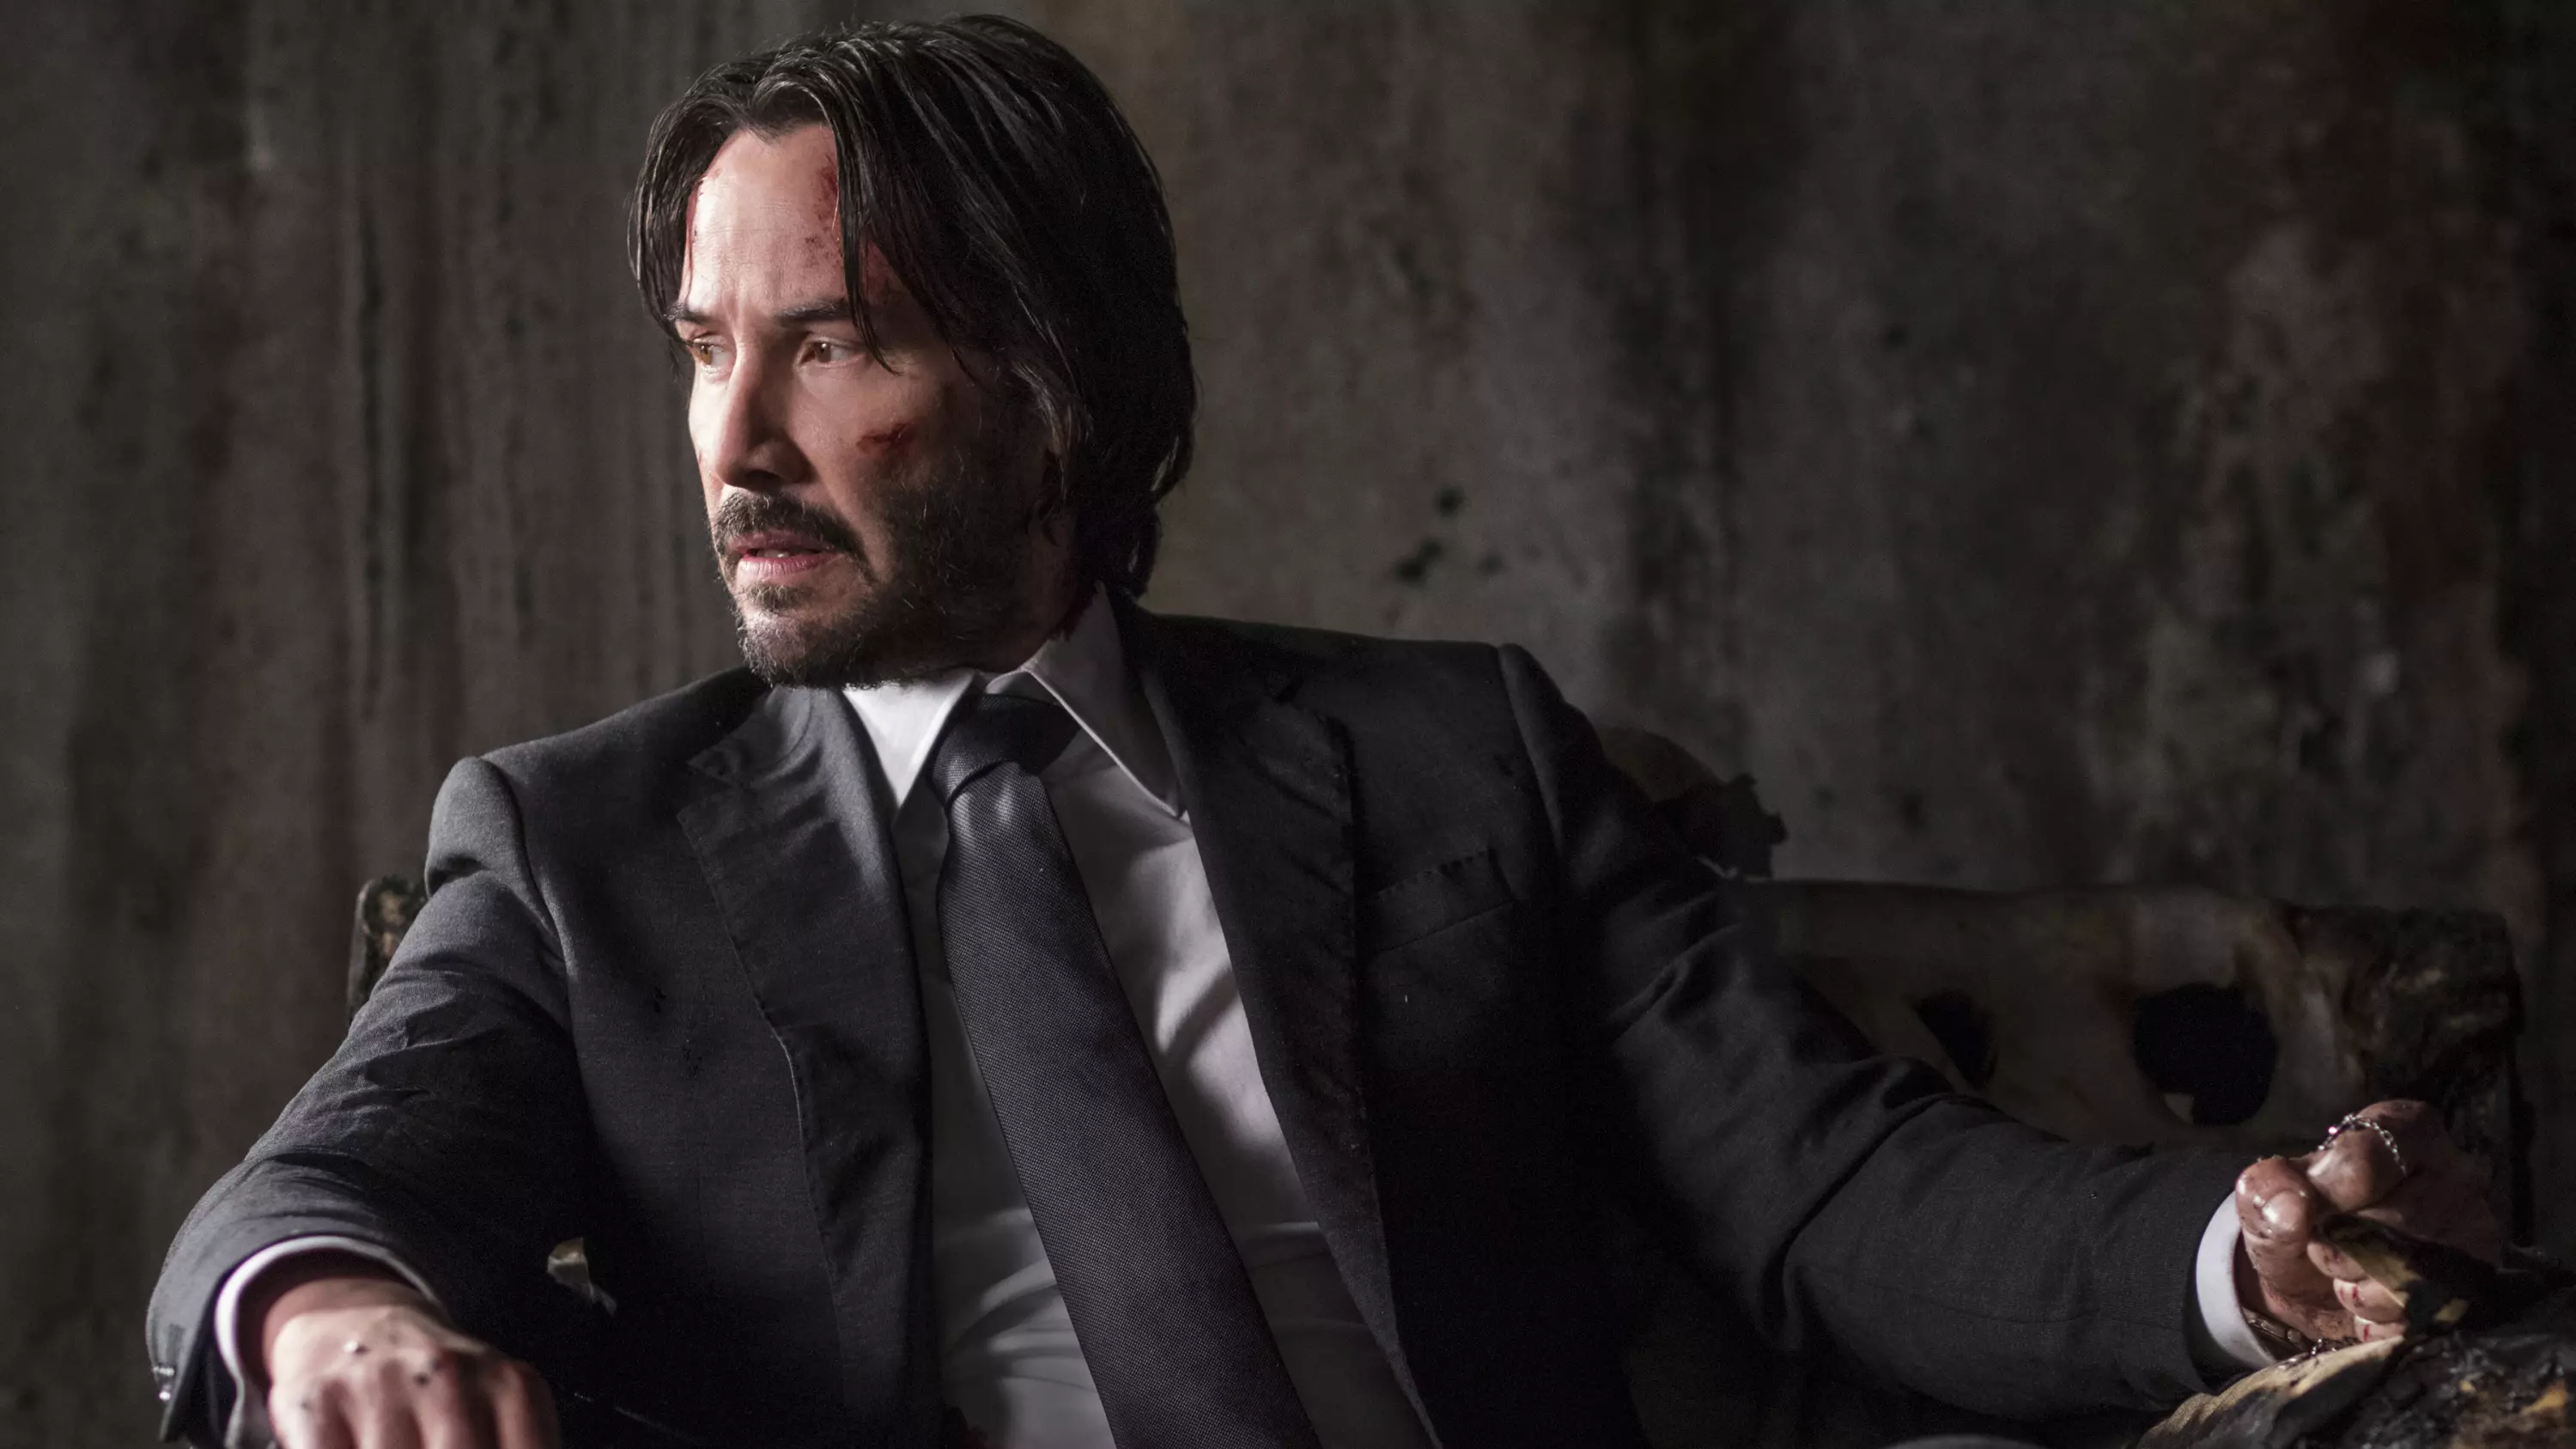 Stuntman Jeremy Fry Confirms Everything We've Heard About Keanu Reeves Is True